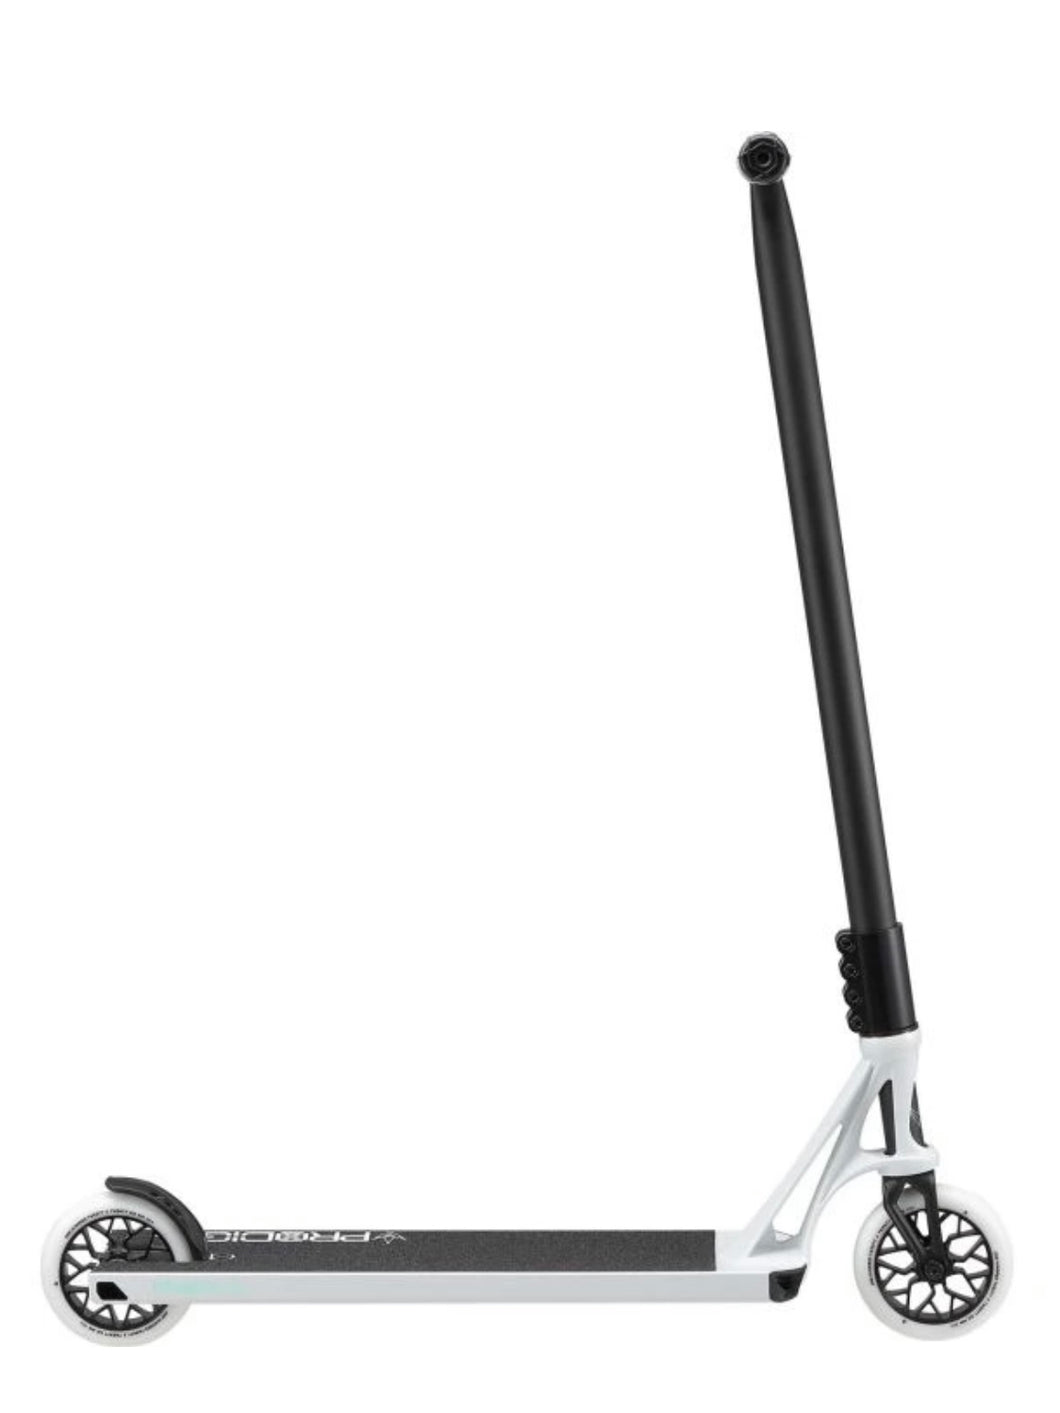 Blunt Envy Prodigy X Street Complete Stunt Scooter - White